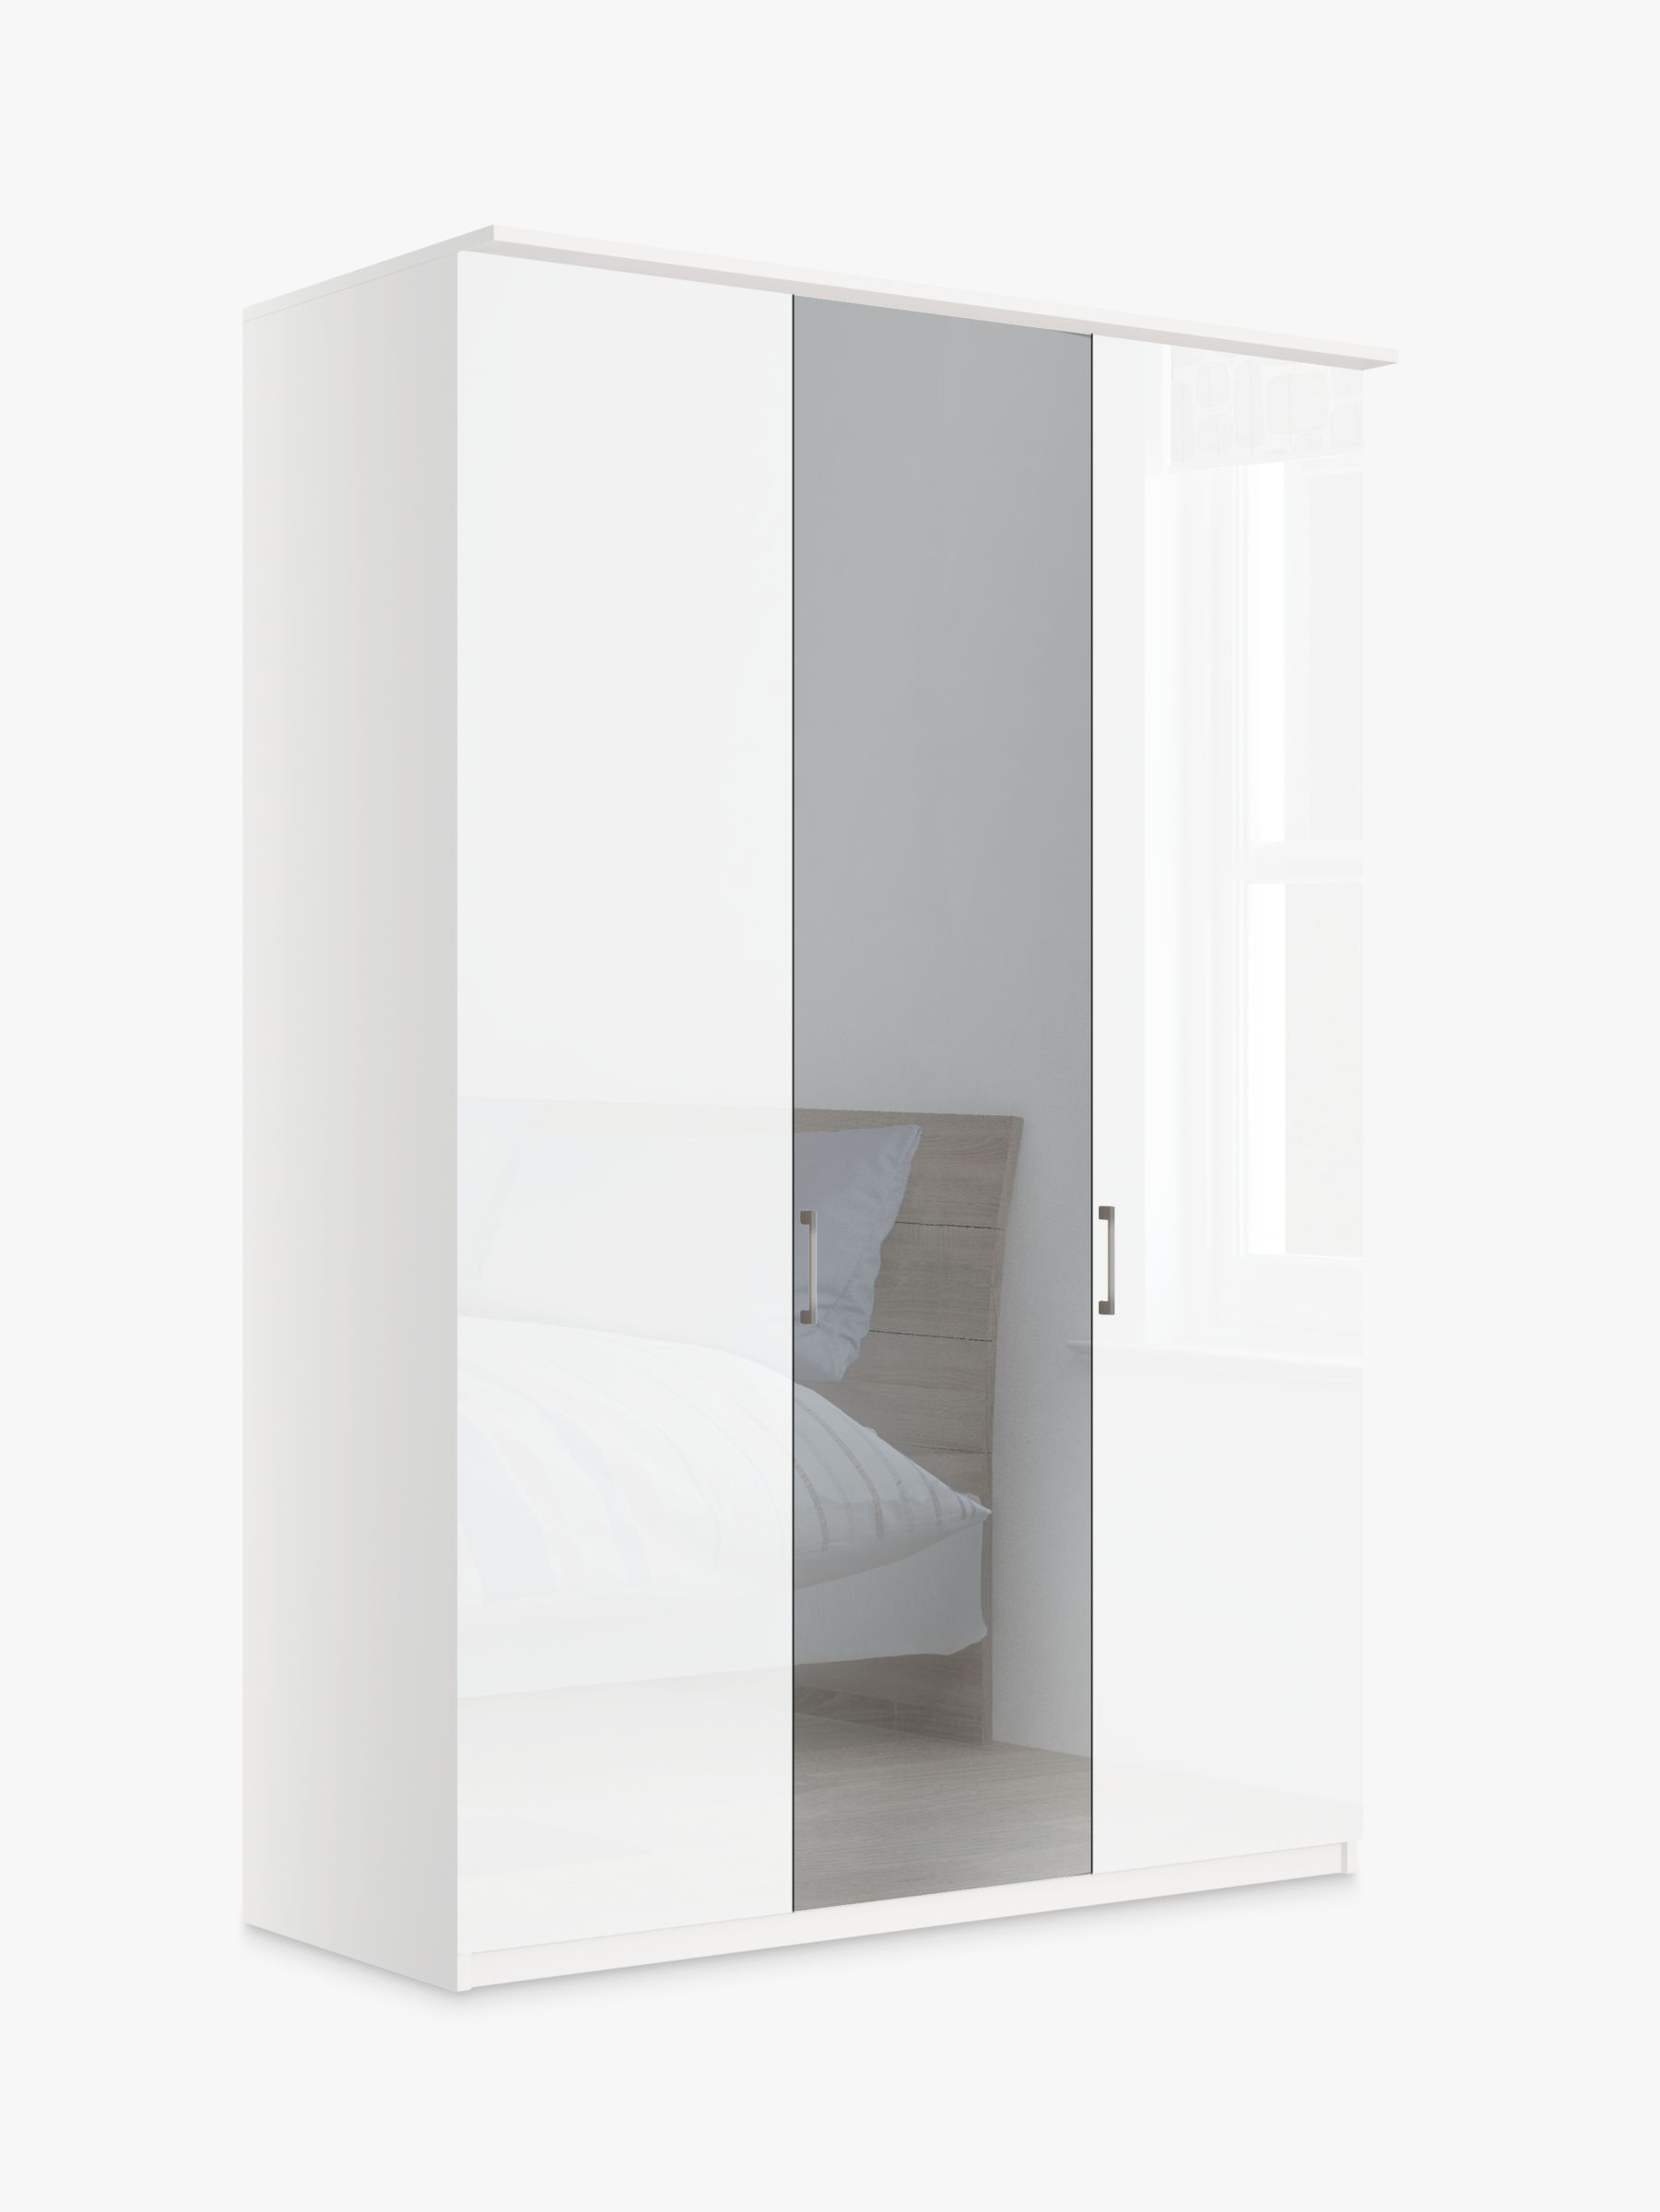 Photo of John lewis elstra 150cm wardrobe with glass and mirrored hinged doors